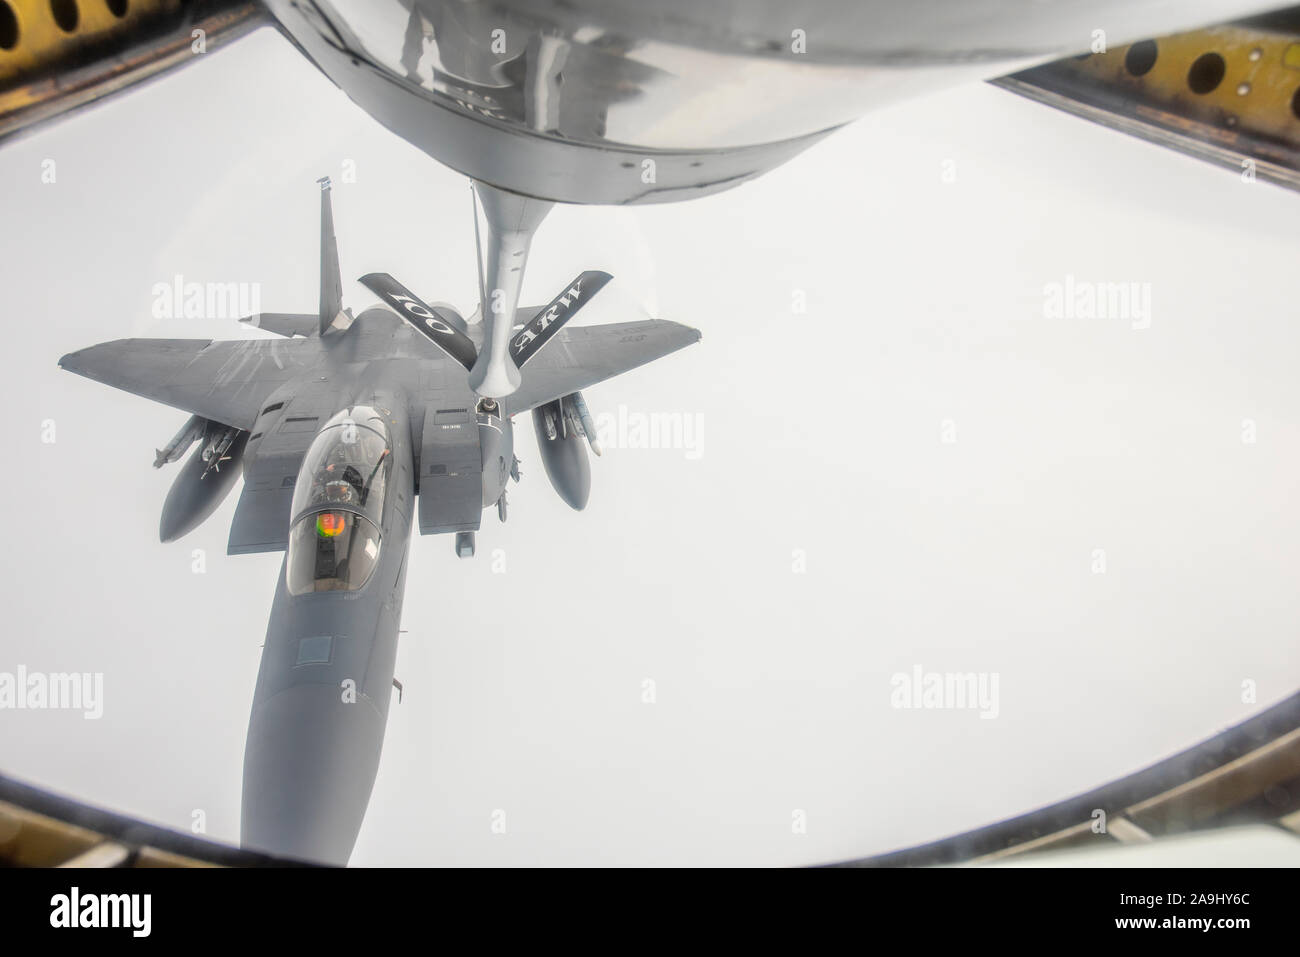 An F-15E Strike Eagle assigned to the 492nd Fighter Squadron at RAF Lakenheath, England, receives fuel from a KC-135 Stratotanker assigned to the 351st Air Refueling Squadron at RAF Mildenhall, England, Nov. 14, 2019. The aircraft were participating in Exercise Point Blank. (U.S. Air Force photo by Airman 1st Class Joseph Barron) Stock Photo